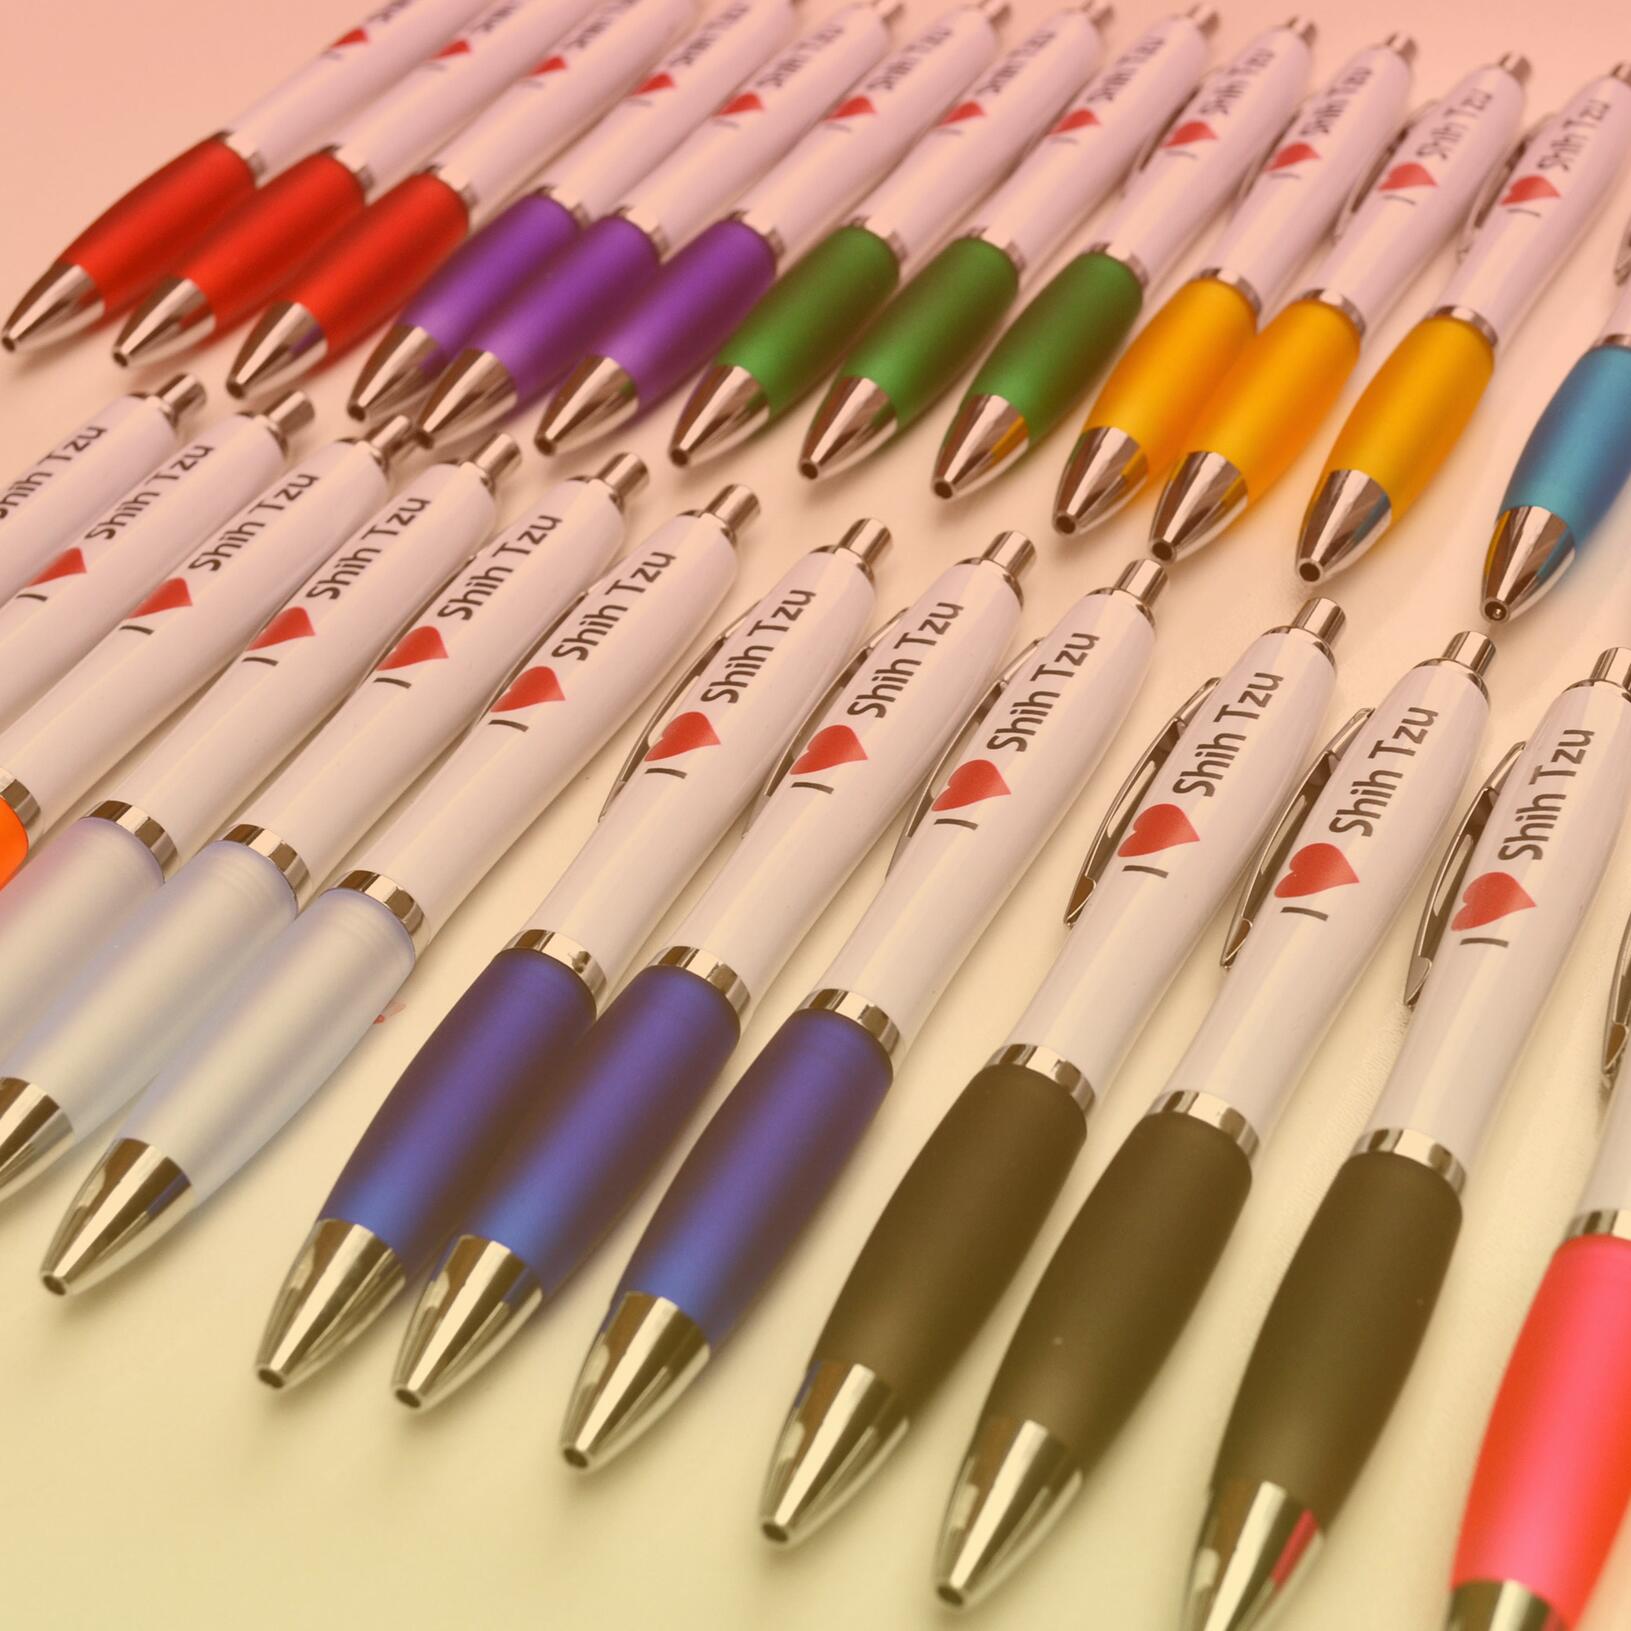 Company logo printed pens for your next event, trade show or promotion